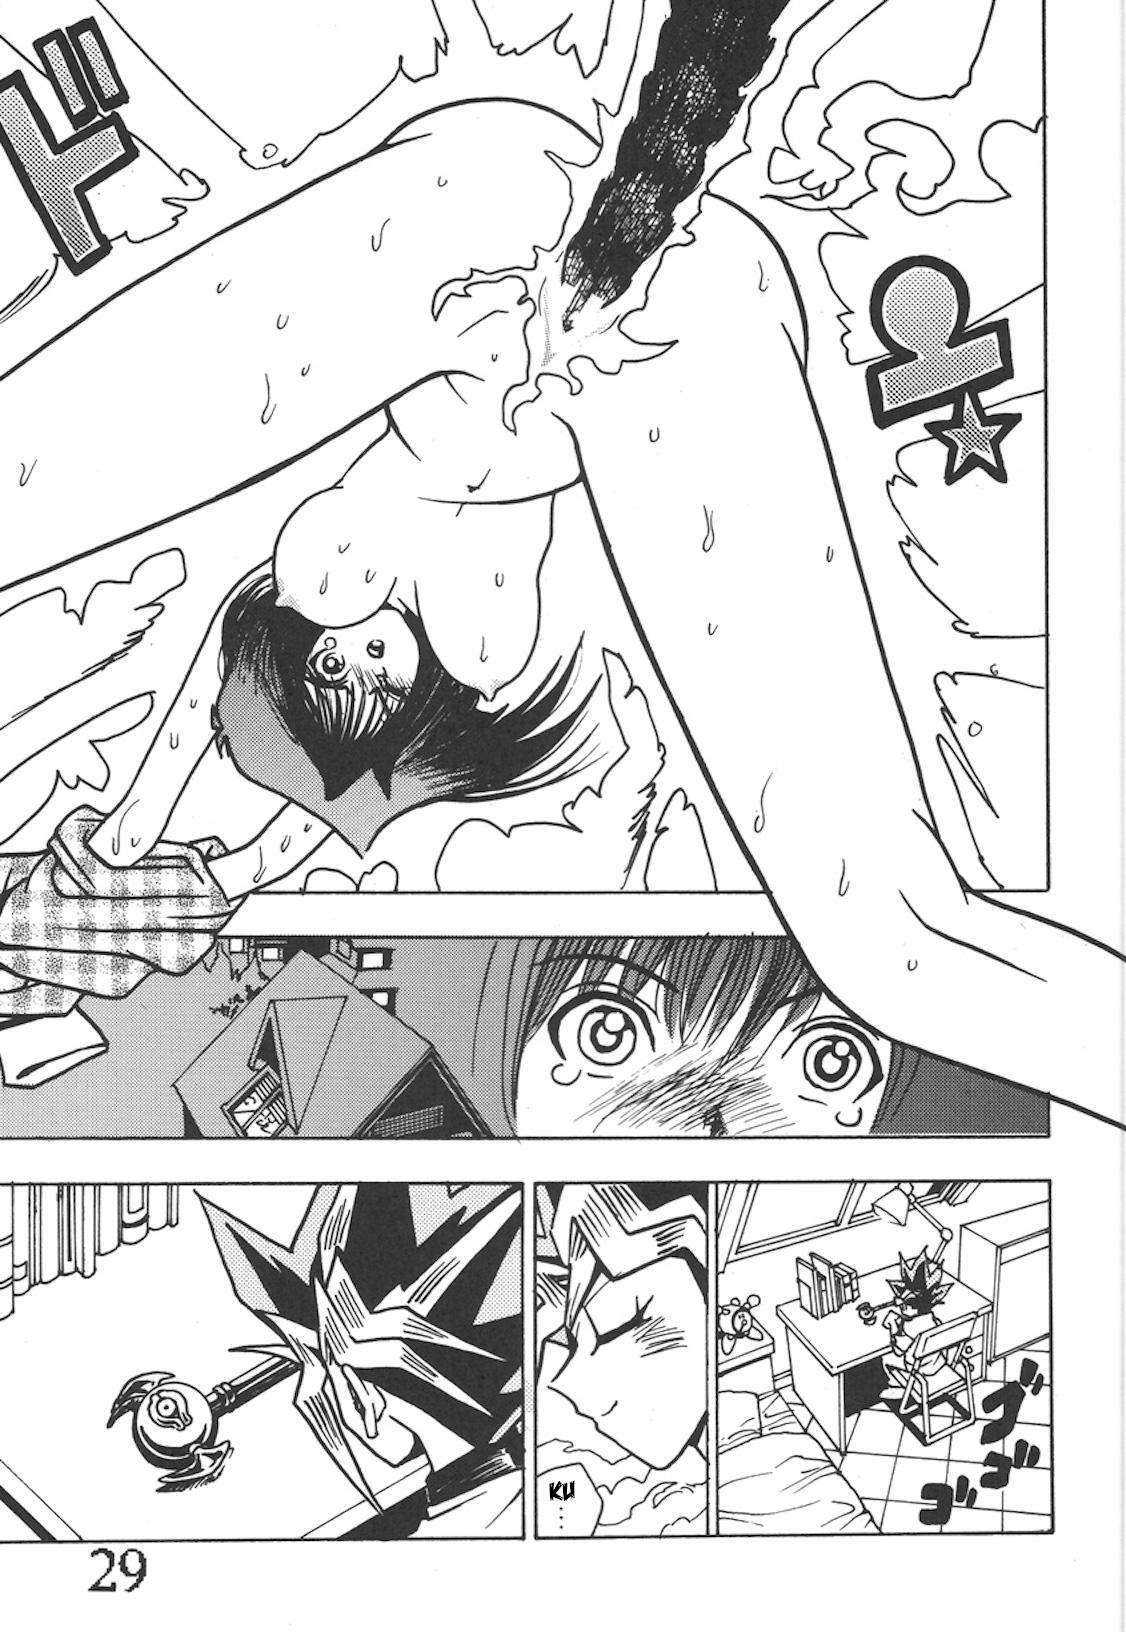 Exhibition Seinen Miracle JUMP - Yu-gi-oh Free Blowjob - Page 26